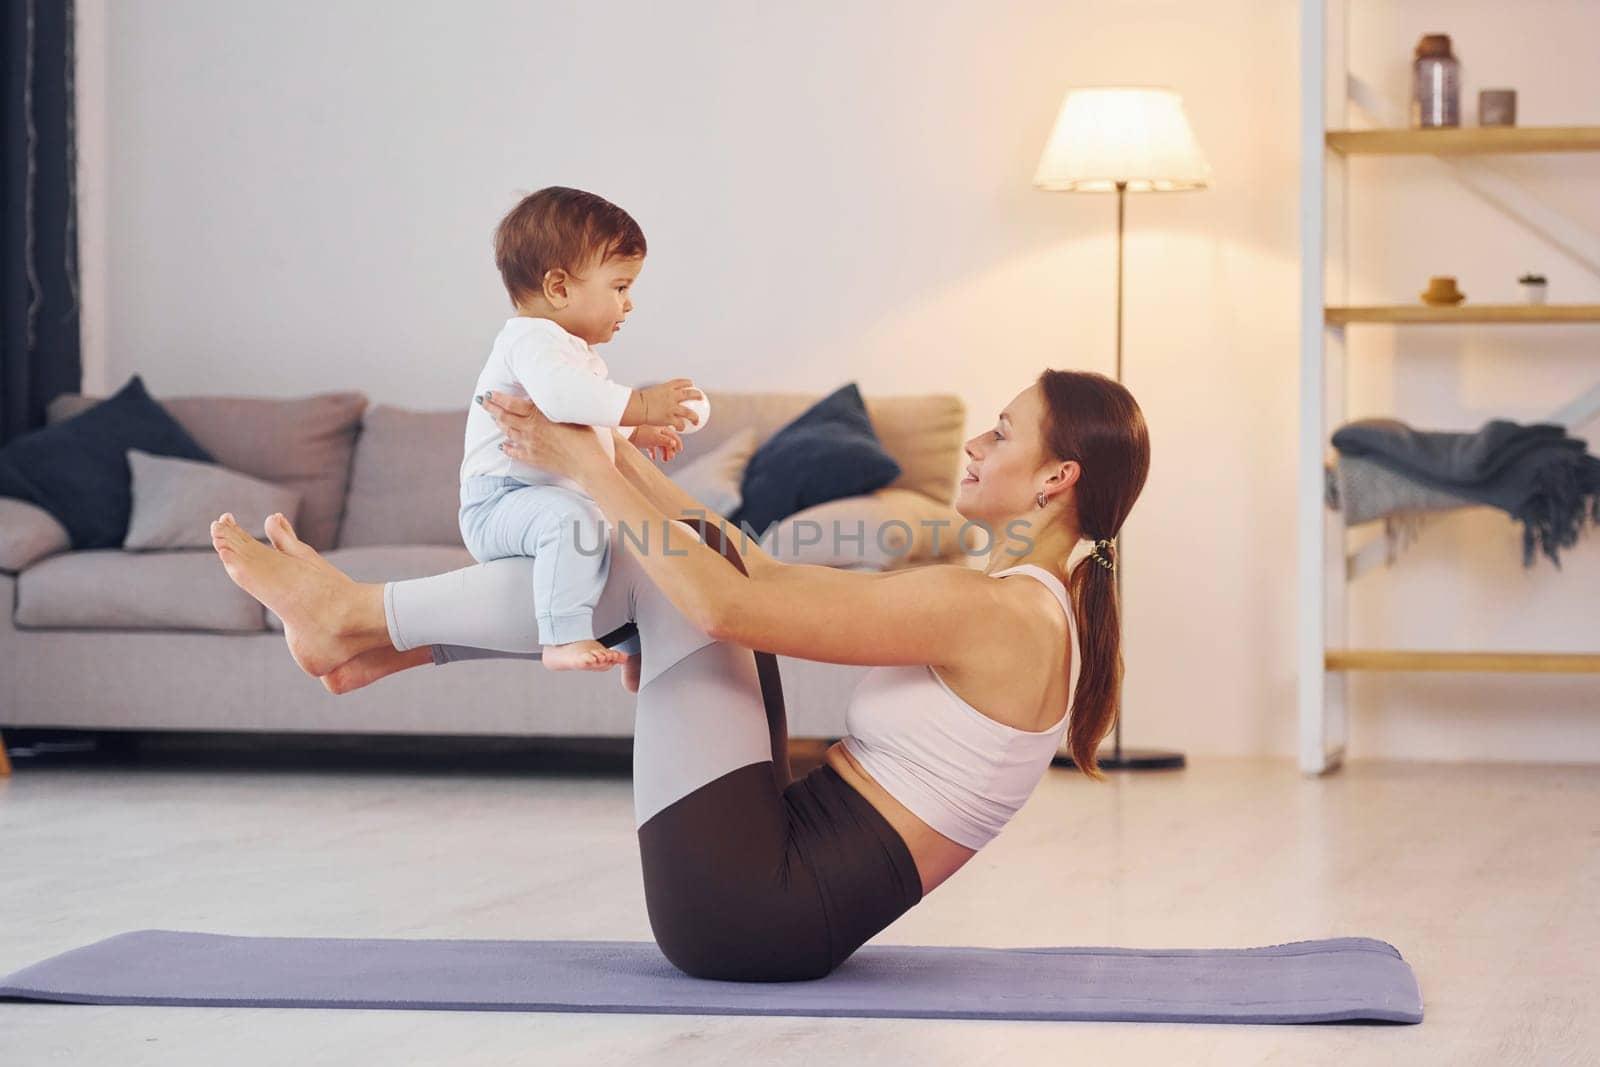 Focused at yoga exercises. Mother with her little daughter is at home together by Standret